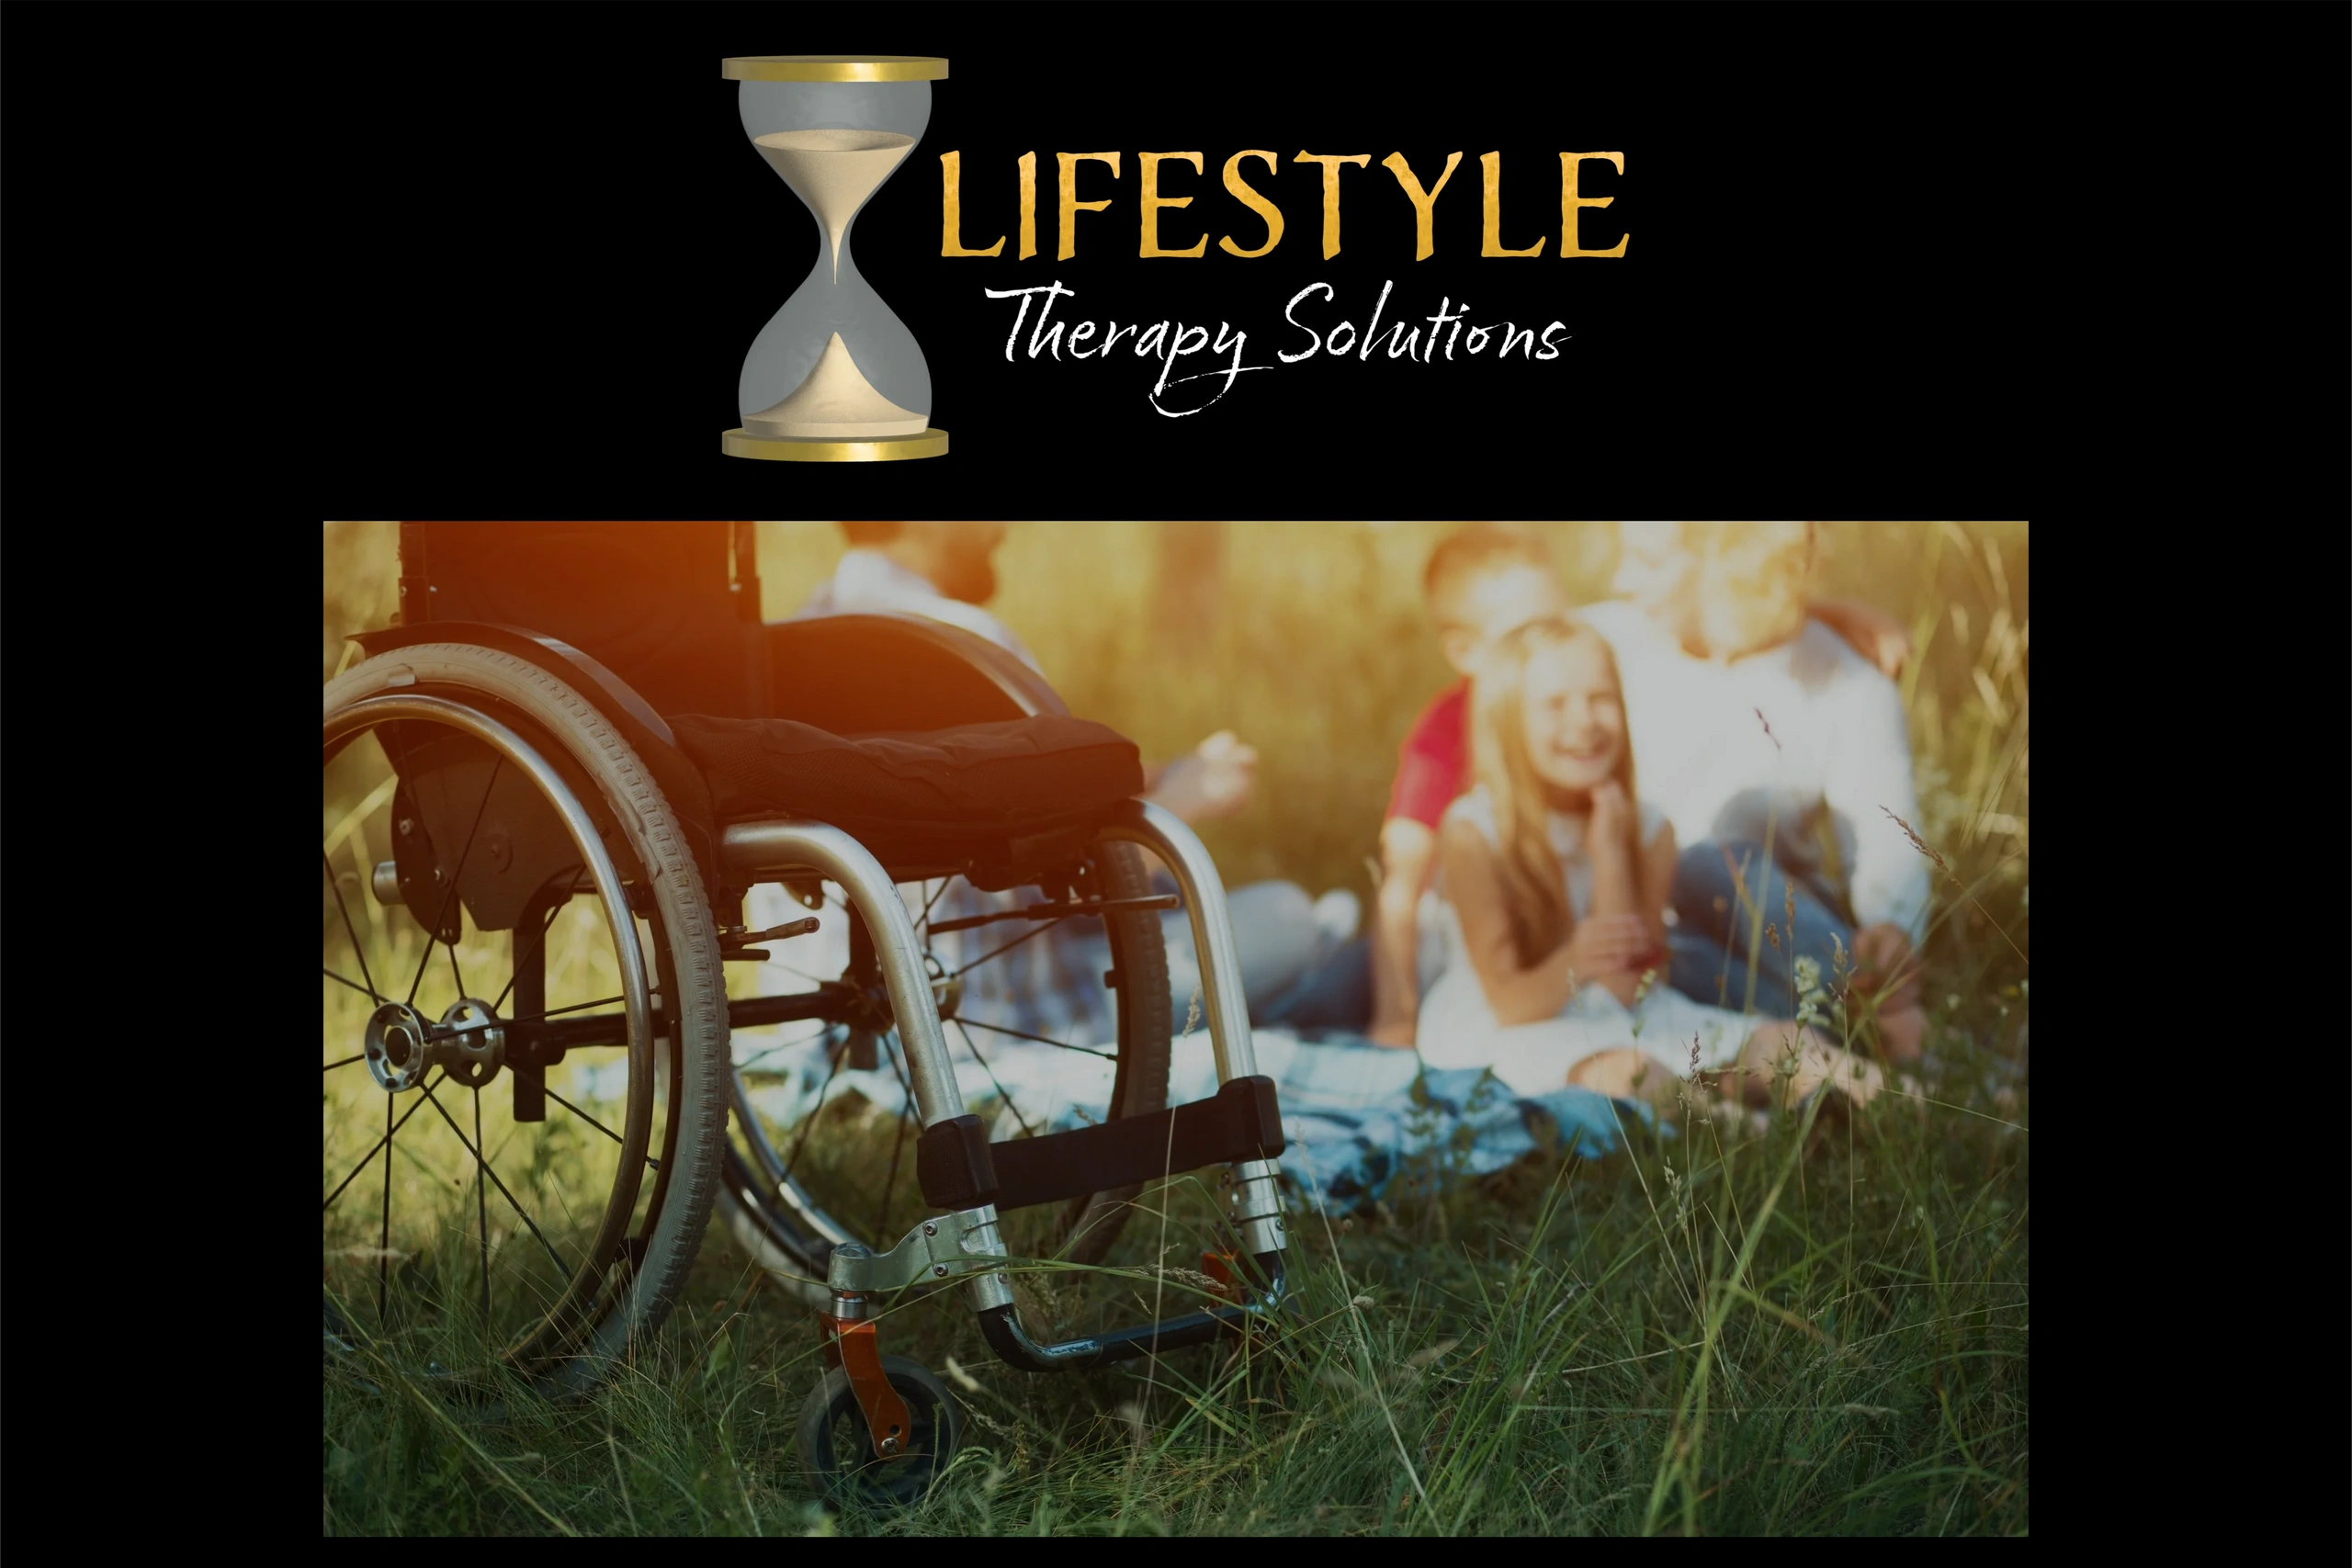 Lifestyle Therapy Solutions logo (hourglass) and a family having a picnic with a wheelchair nearby.